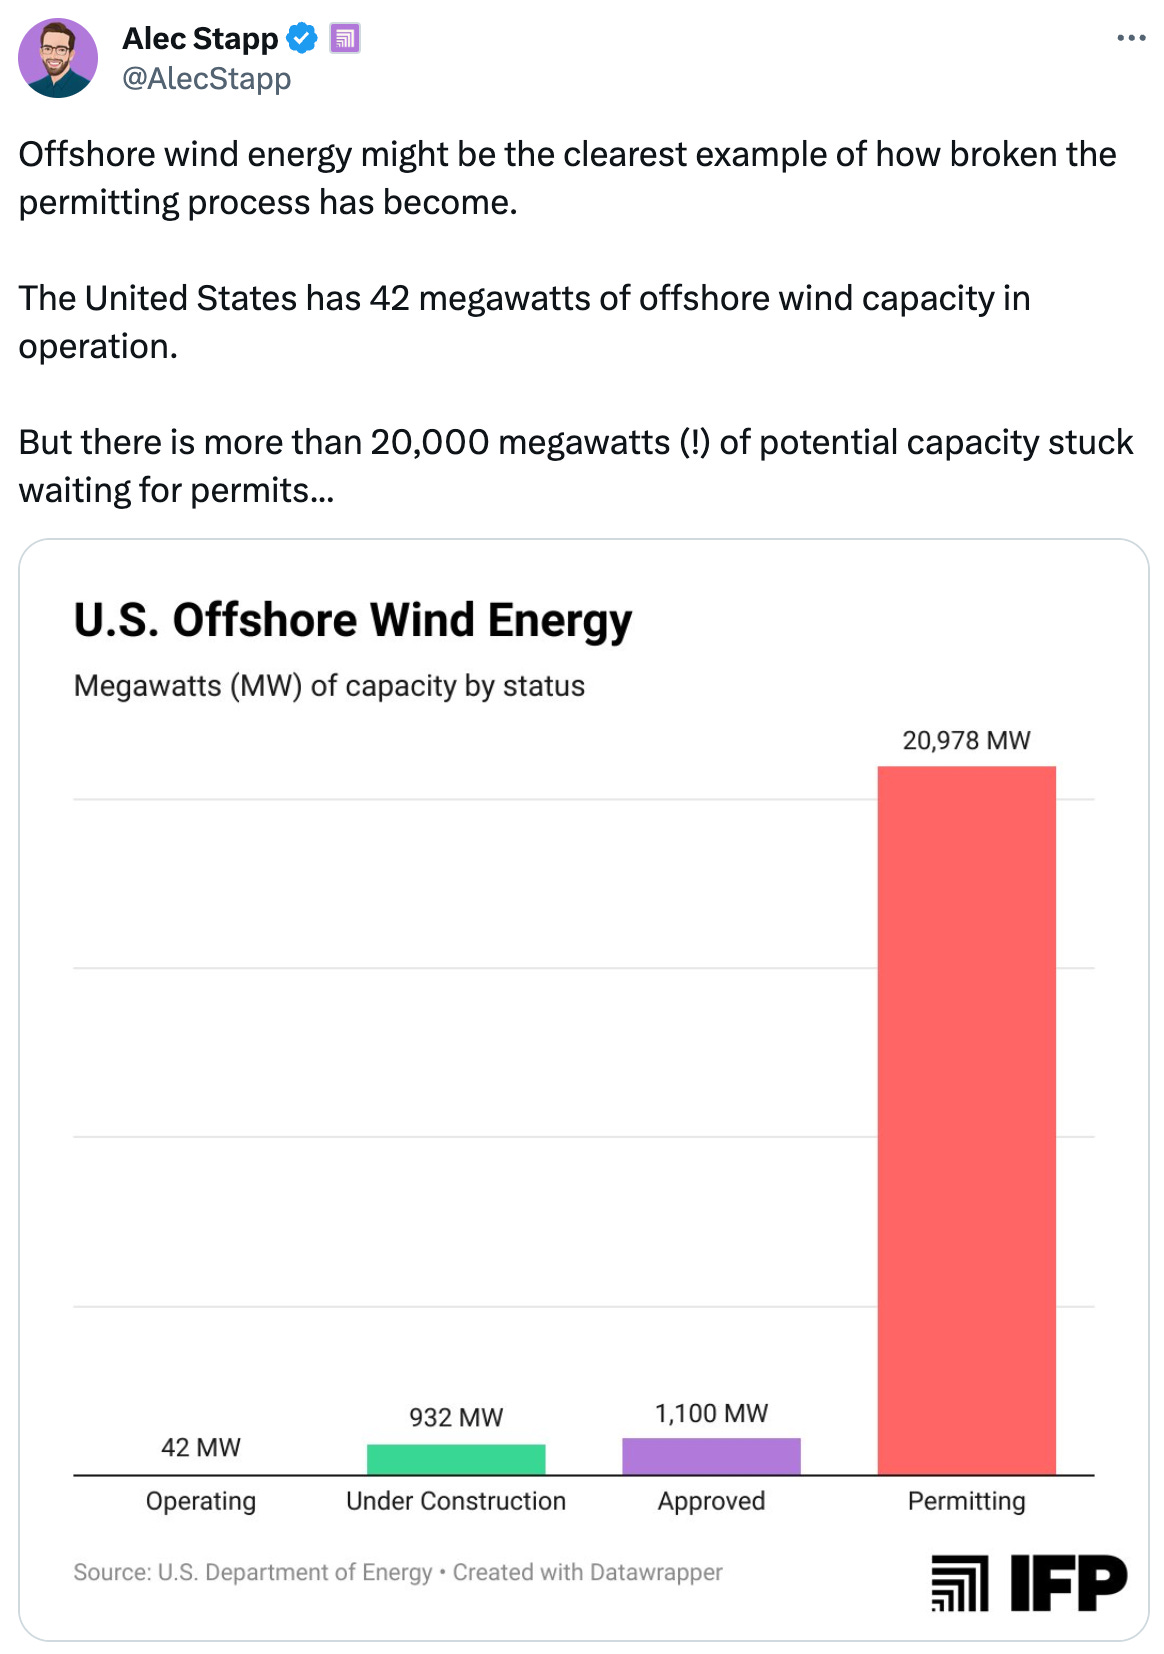  Alec Stapp  @AlecStapp Offshore wind energy might be the clearest example of how broken the permitting process has become.  The United States has 42 megawatts of offshore wind capacity in operation.  But there is more than 20,000 megawatts (!) of potential capacity stuck waiting for permits.